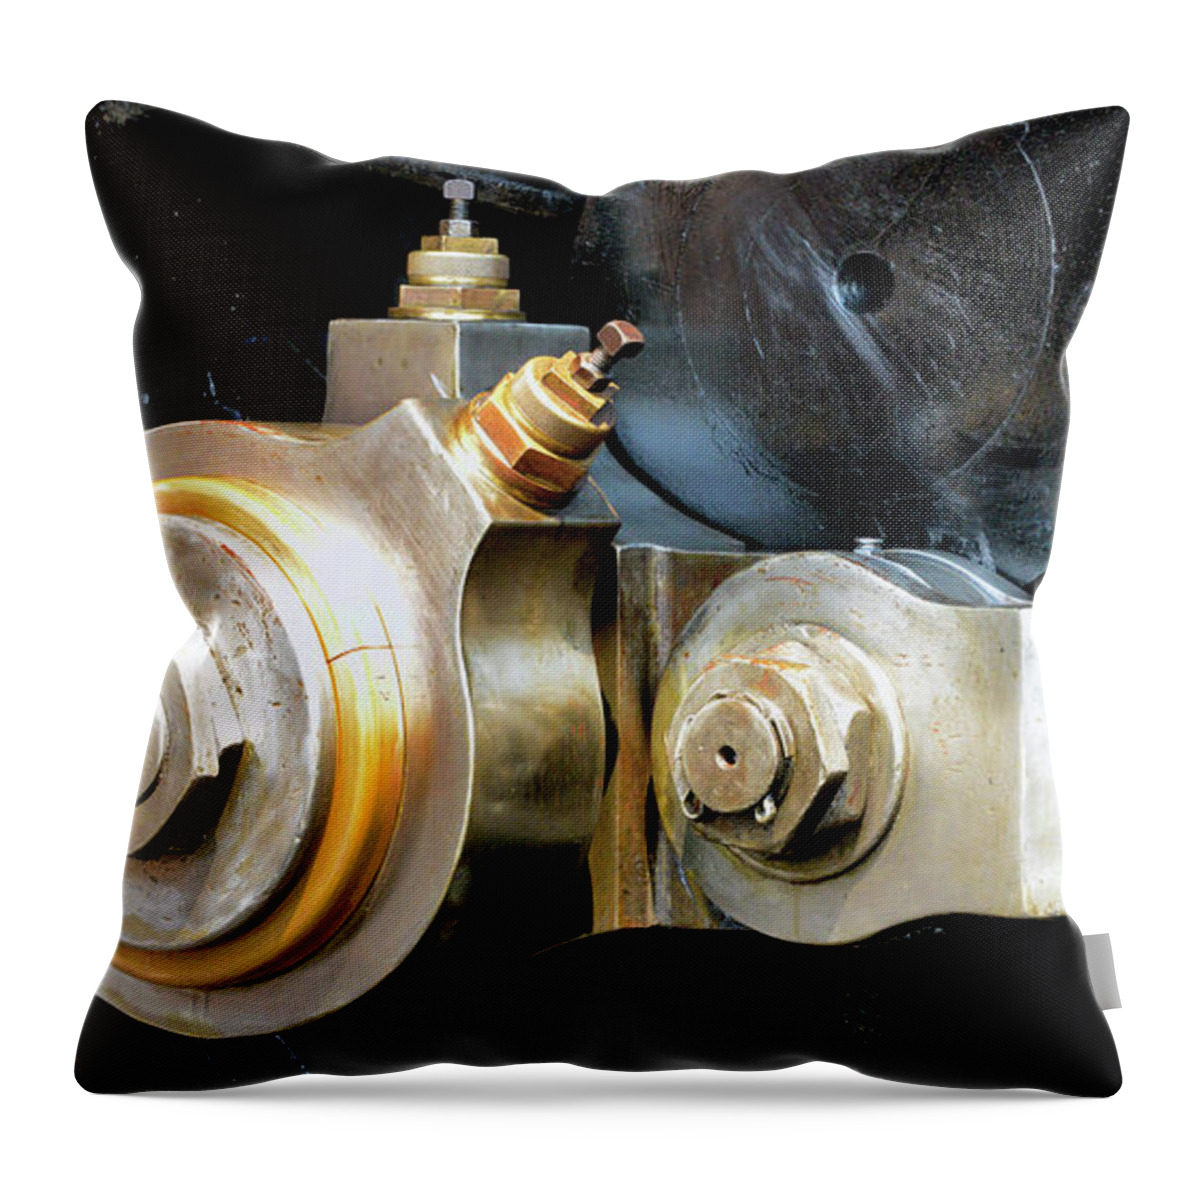 D2-rr-1798-p Throw Pillow featuring the photograph Drive wheel linkage by Paul W Faust - Impressions of Light